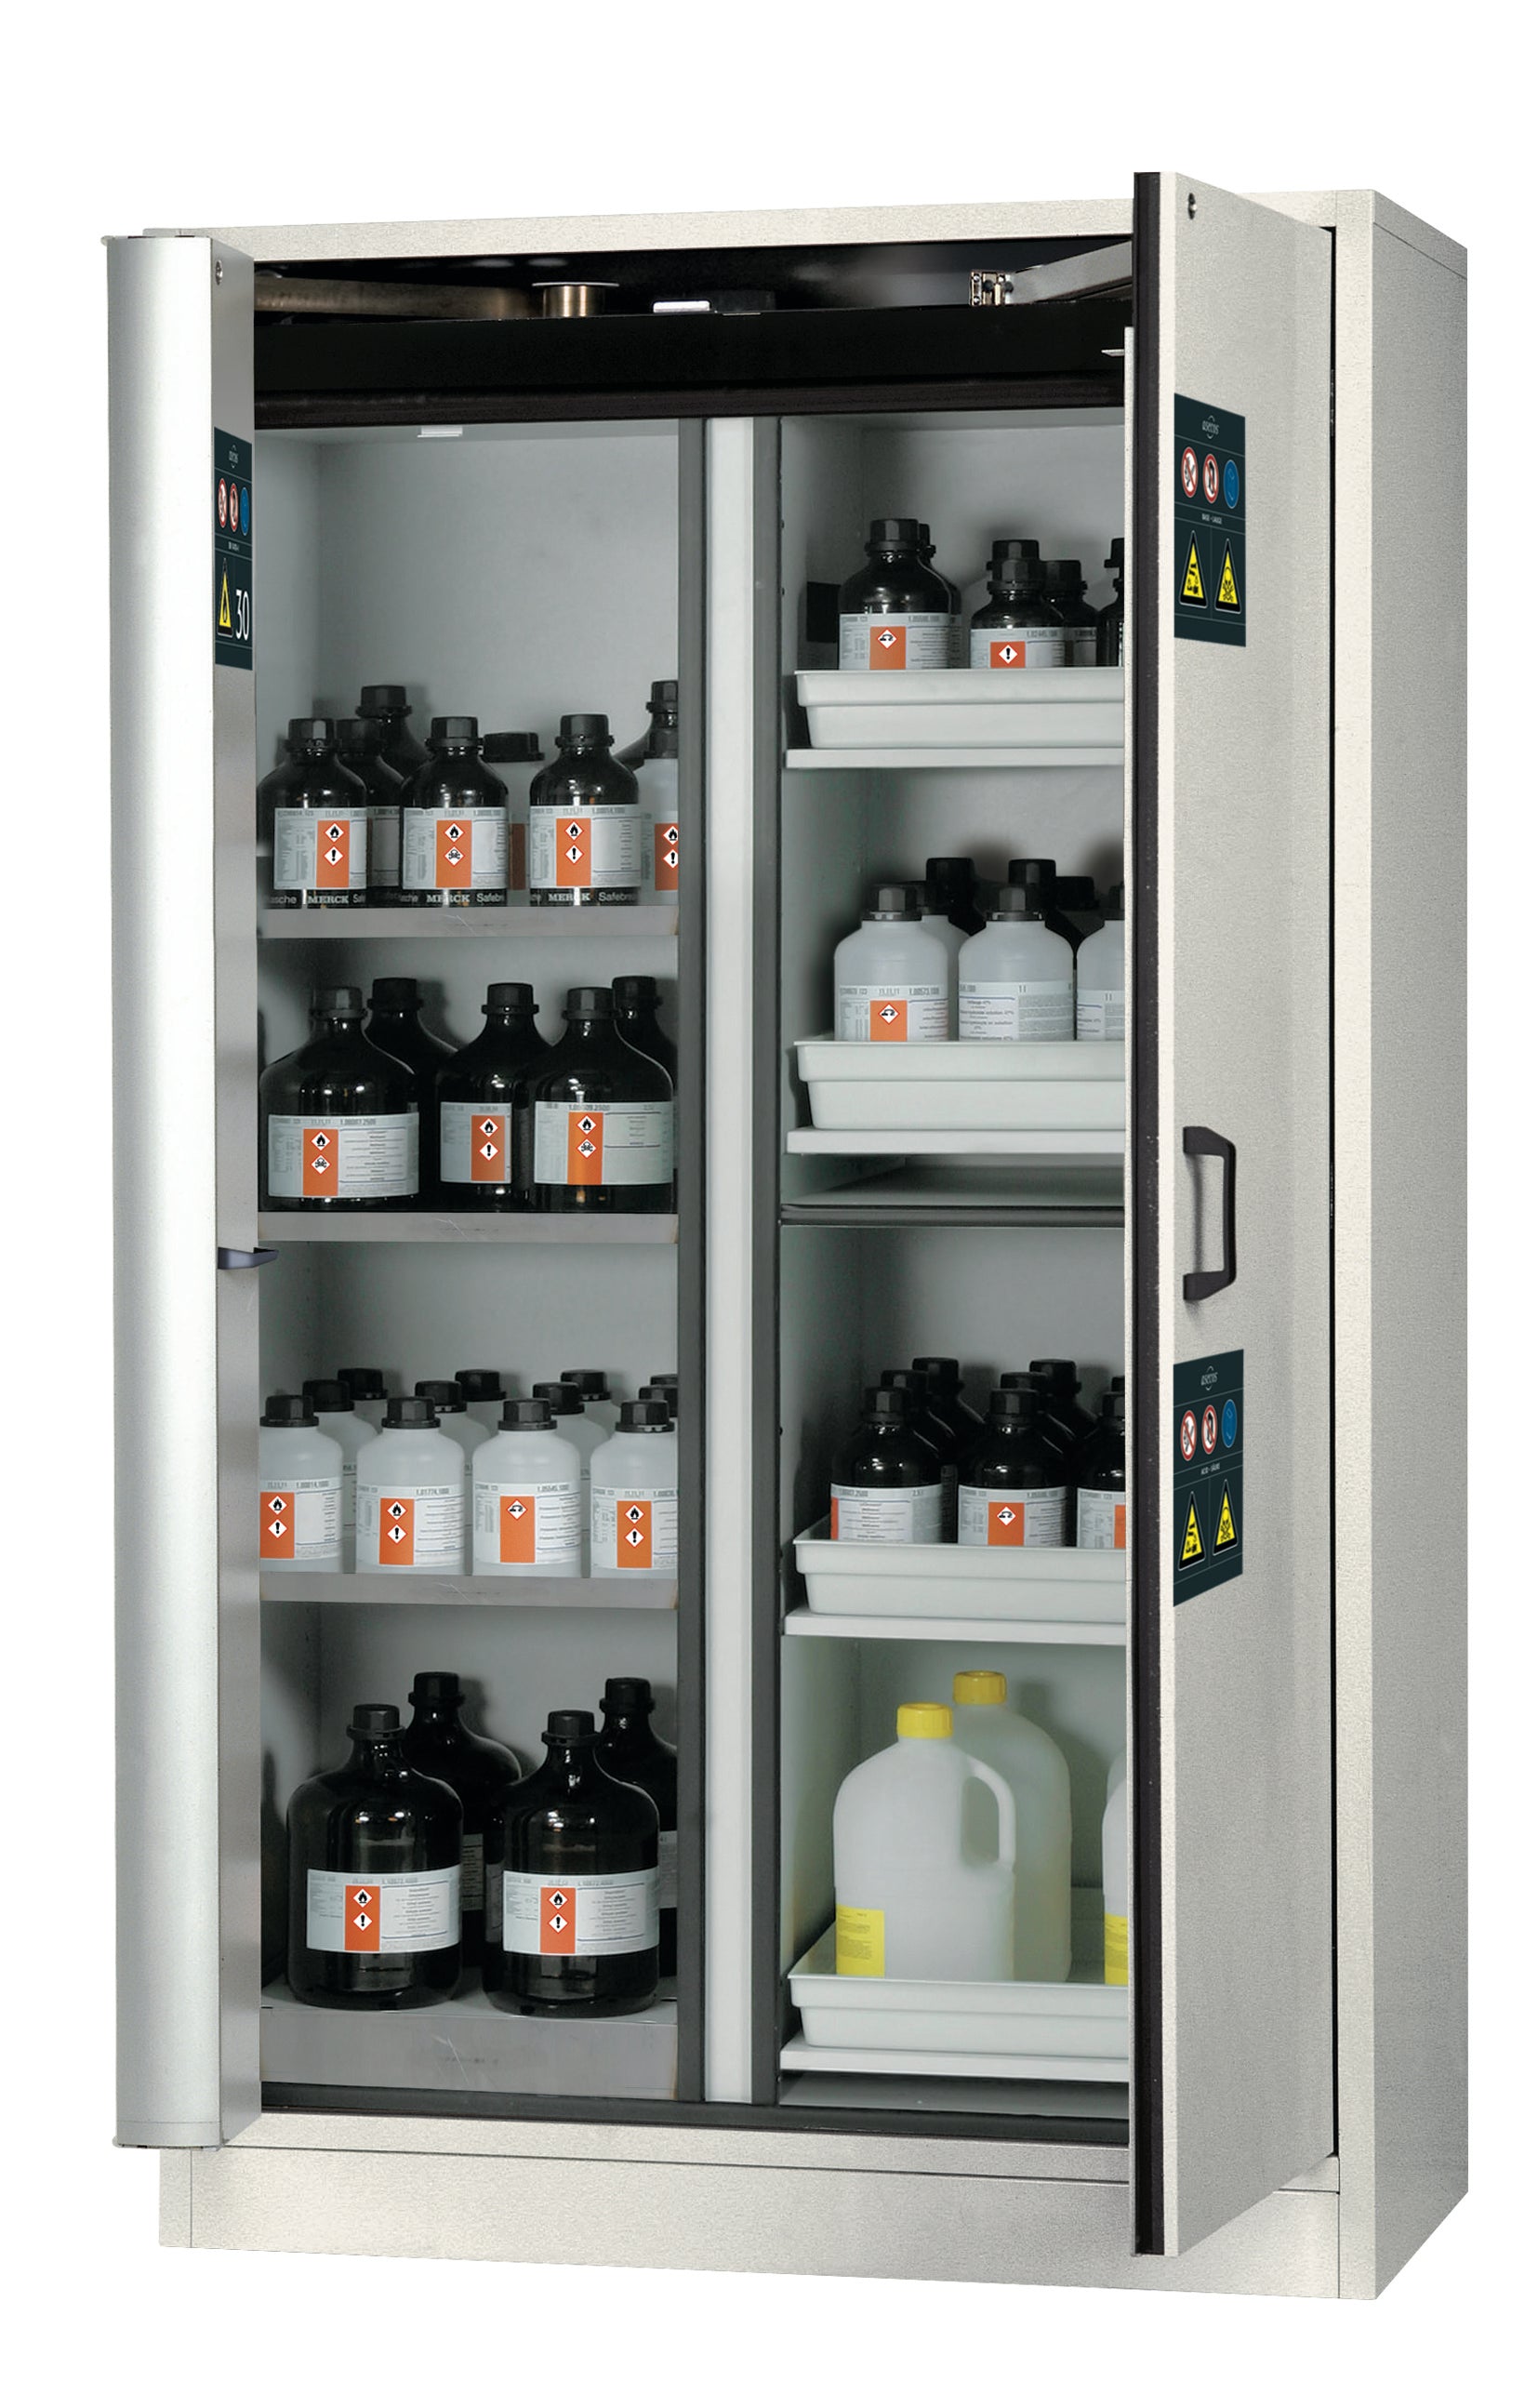 Type 30 combination safety cabinet K-PHOENIX-30 model K30.197.120.MV.FWAS in light gray RAL 7035 with 3x standard shelves (stainless steel 1.4301)